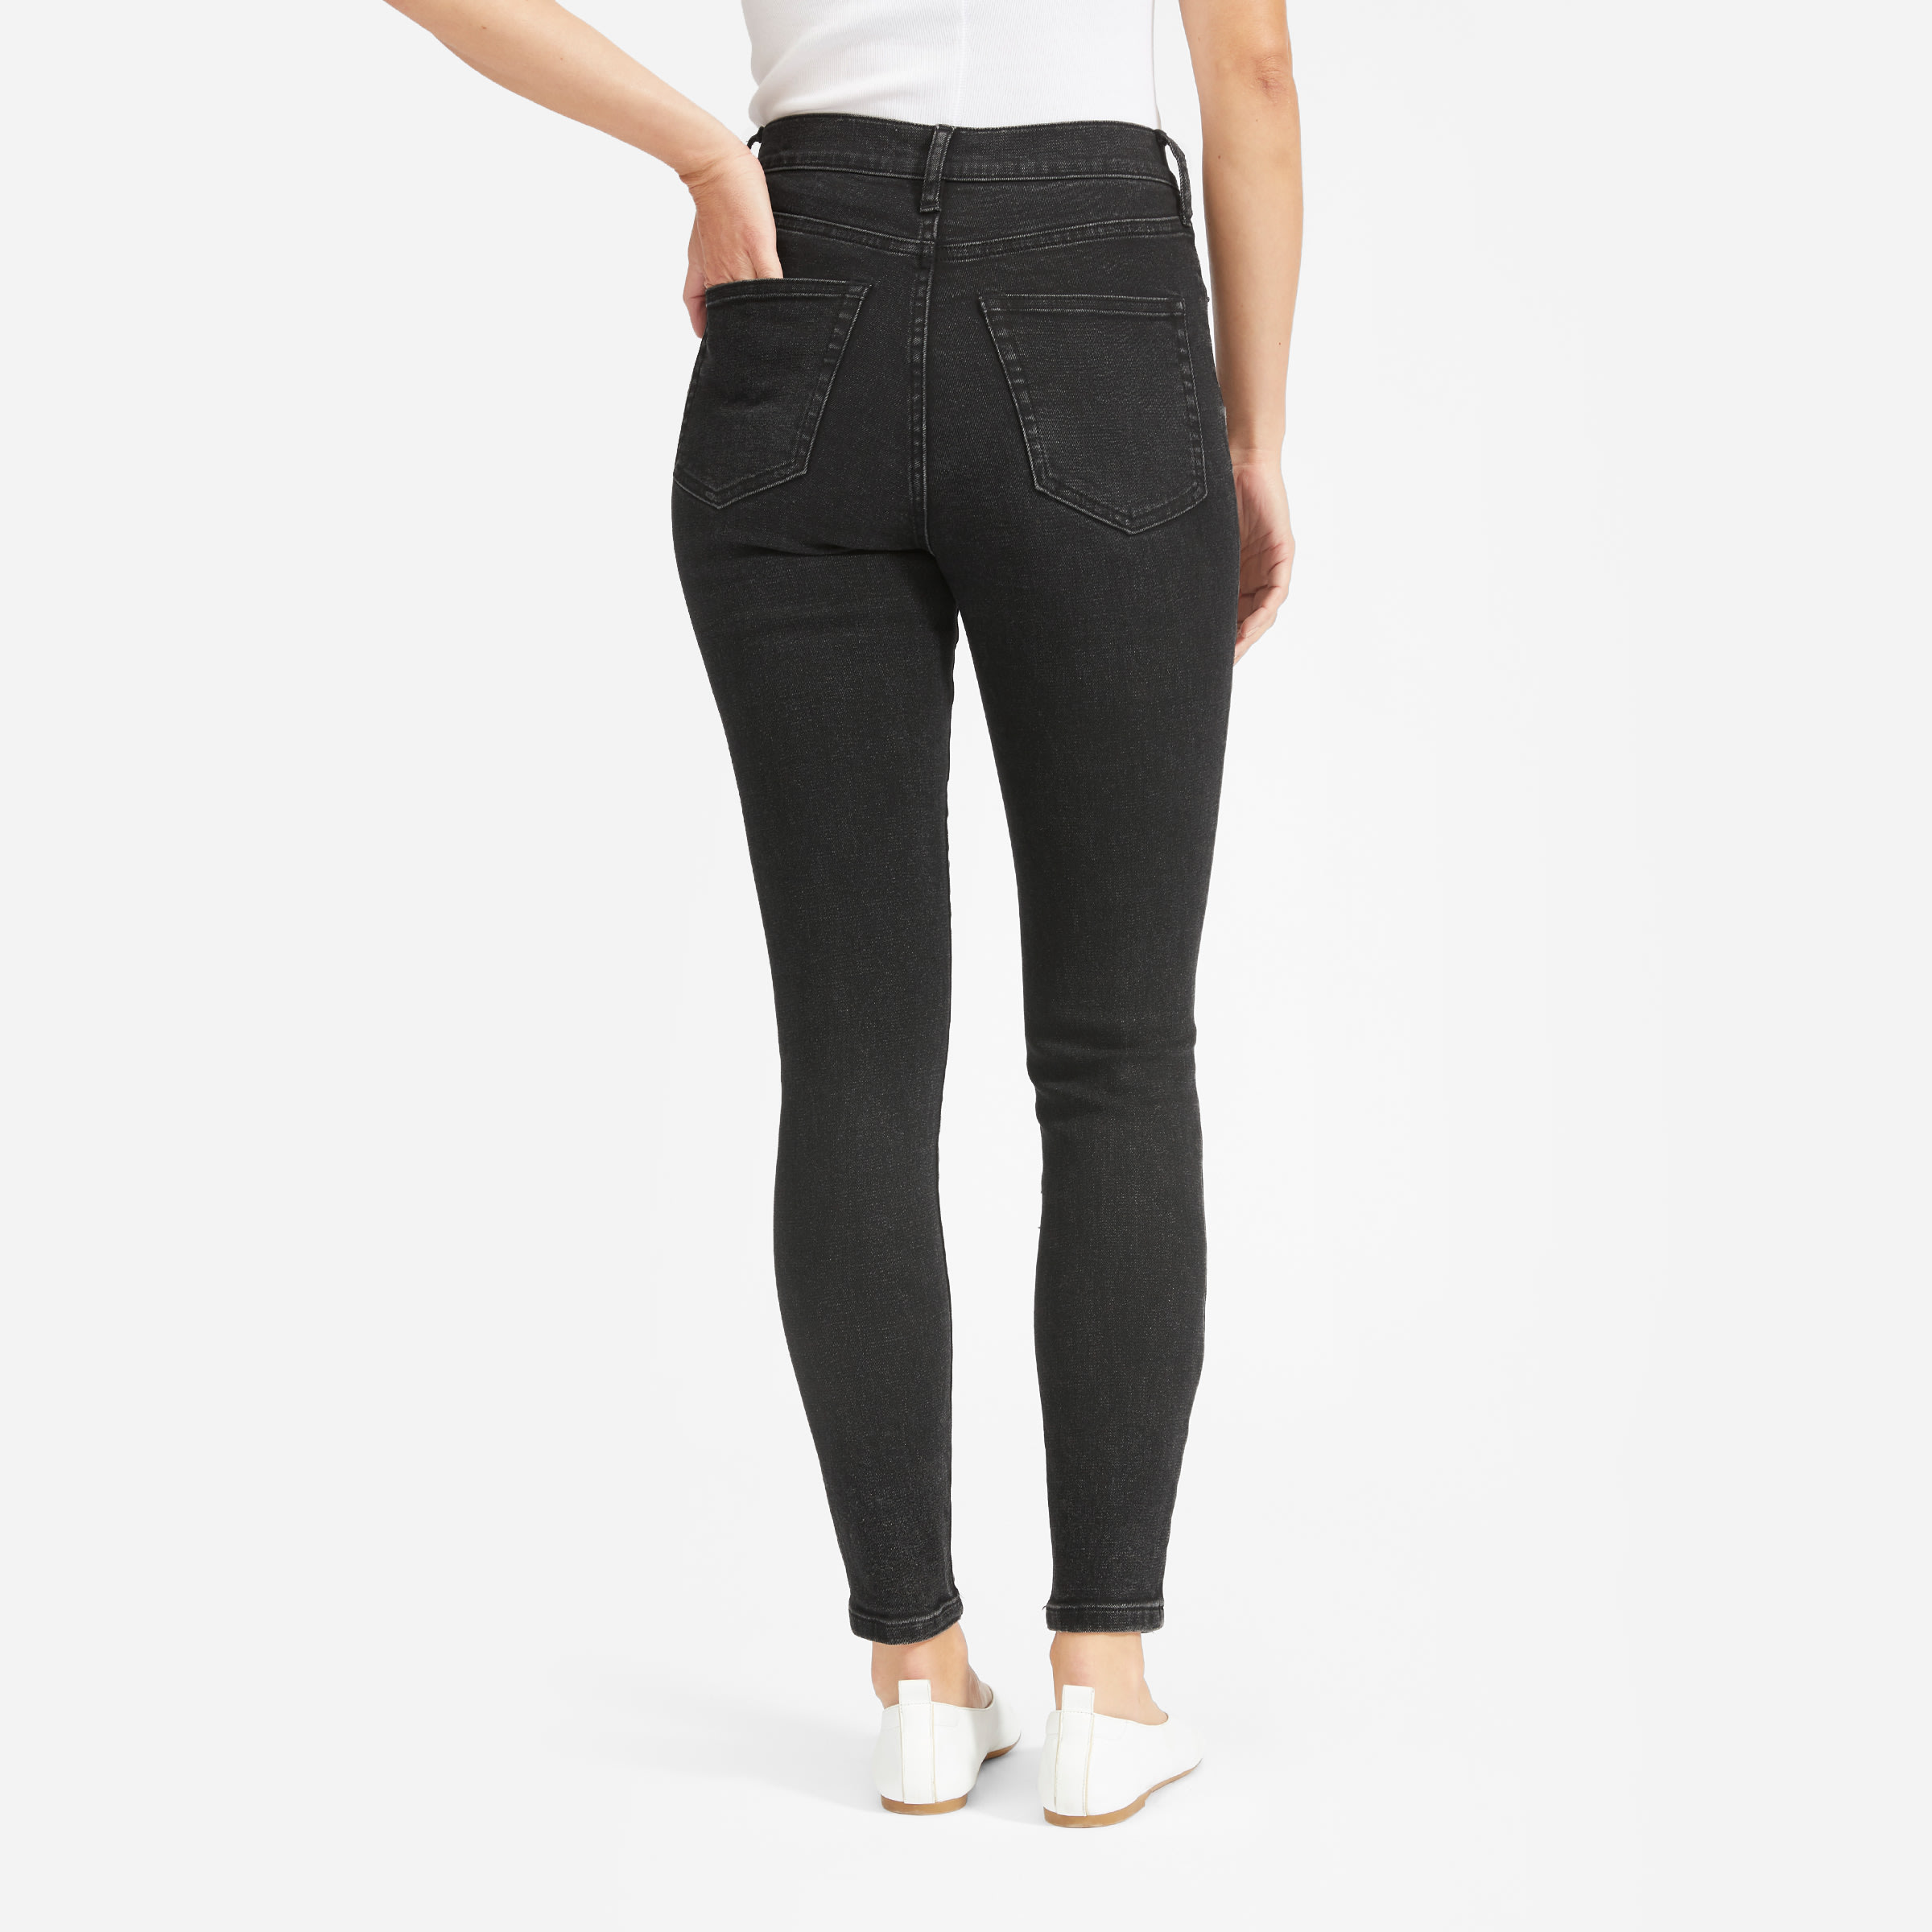 3 button high waisted black jeans